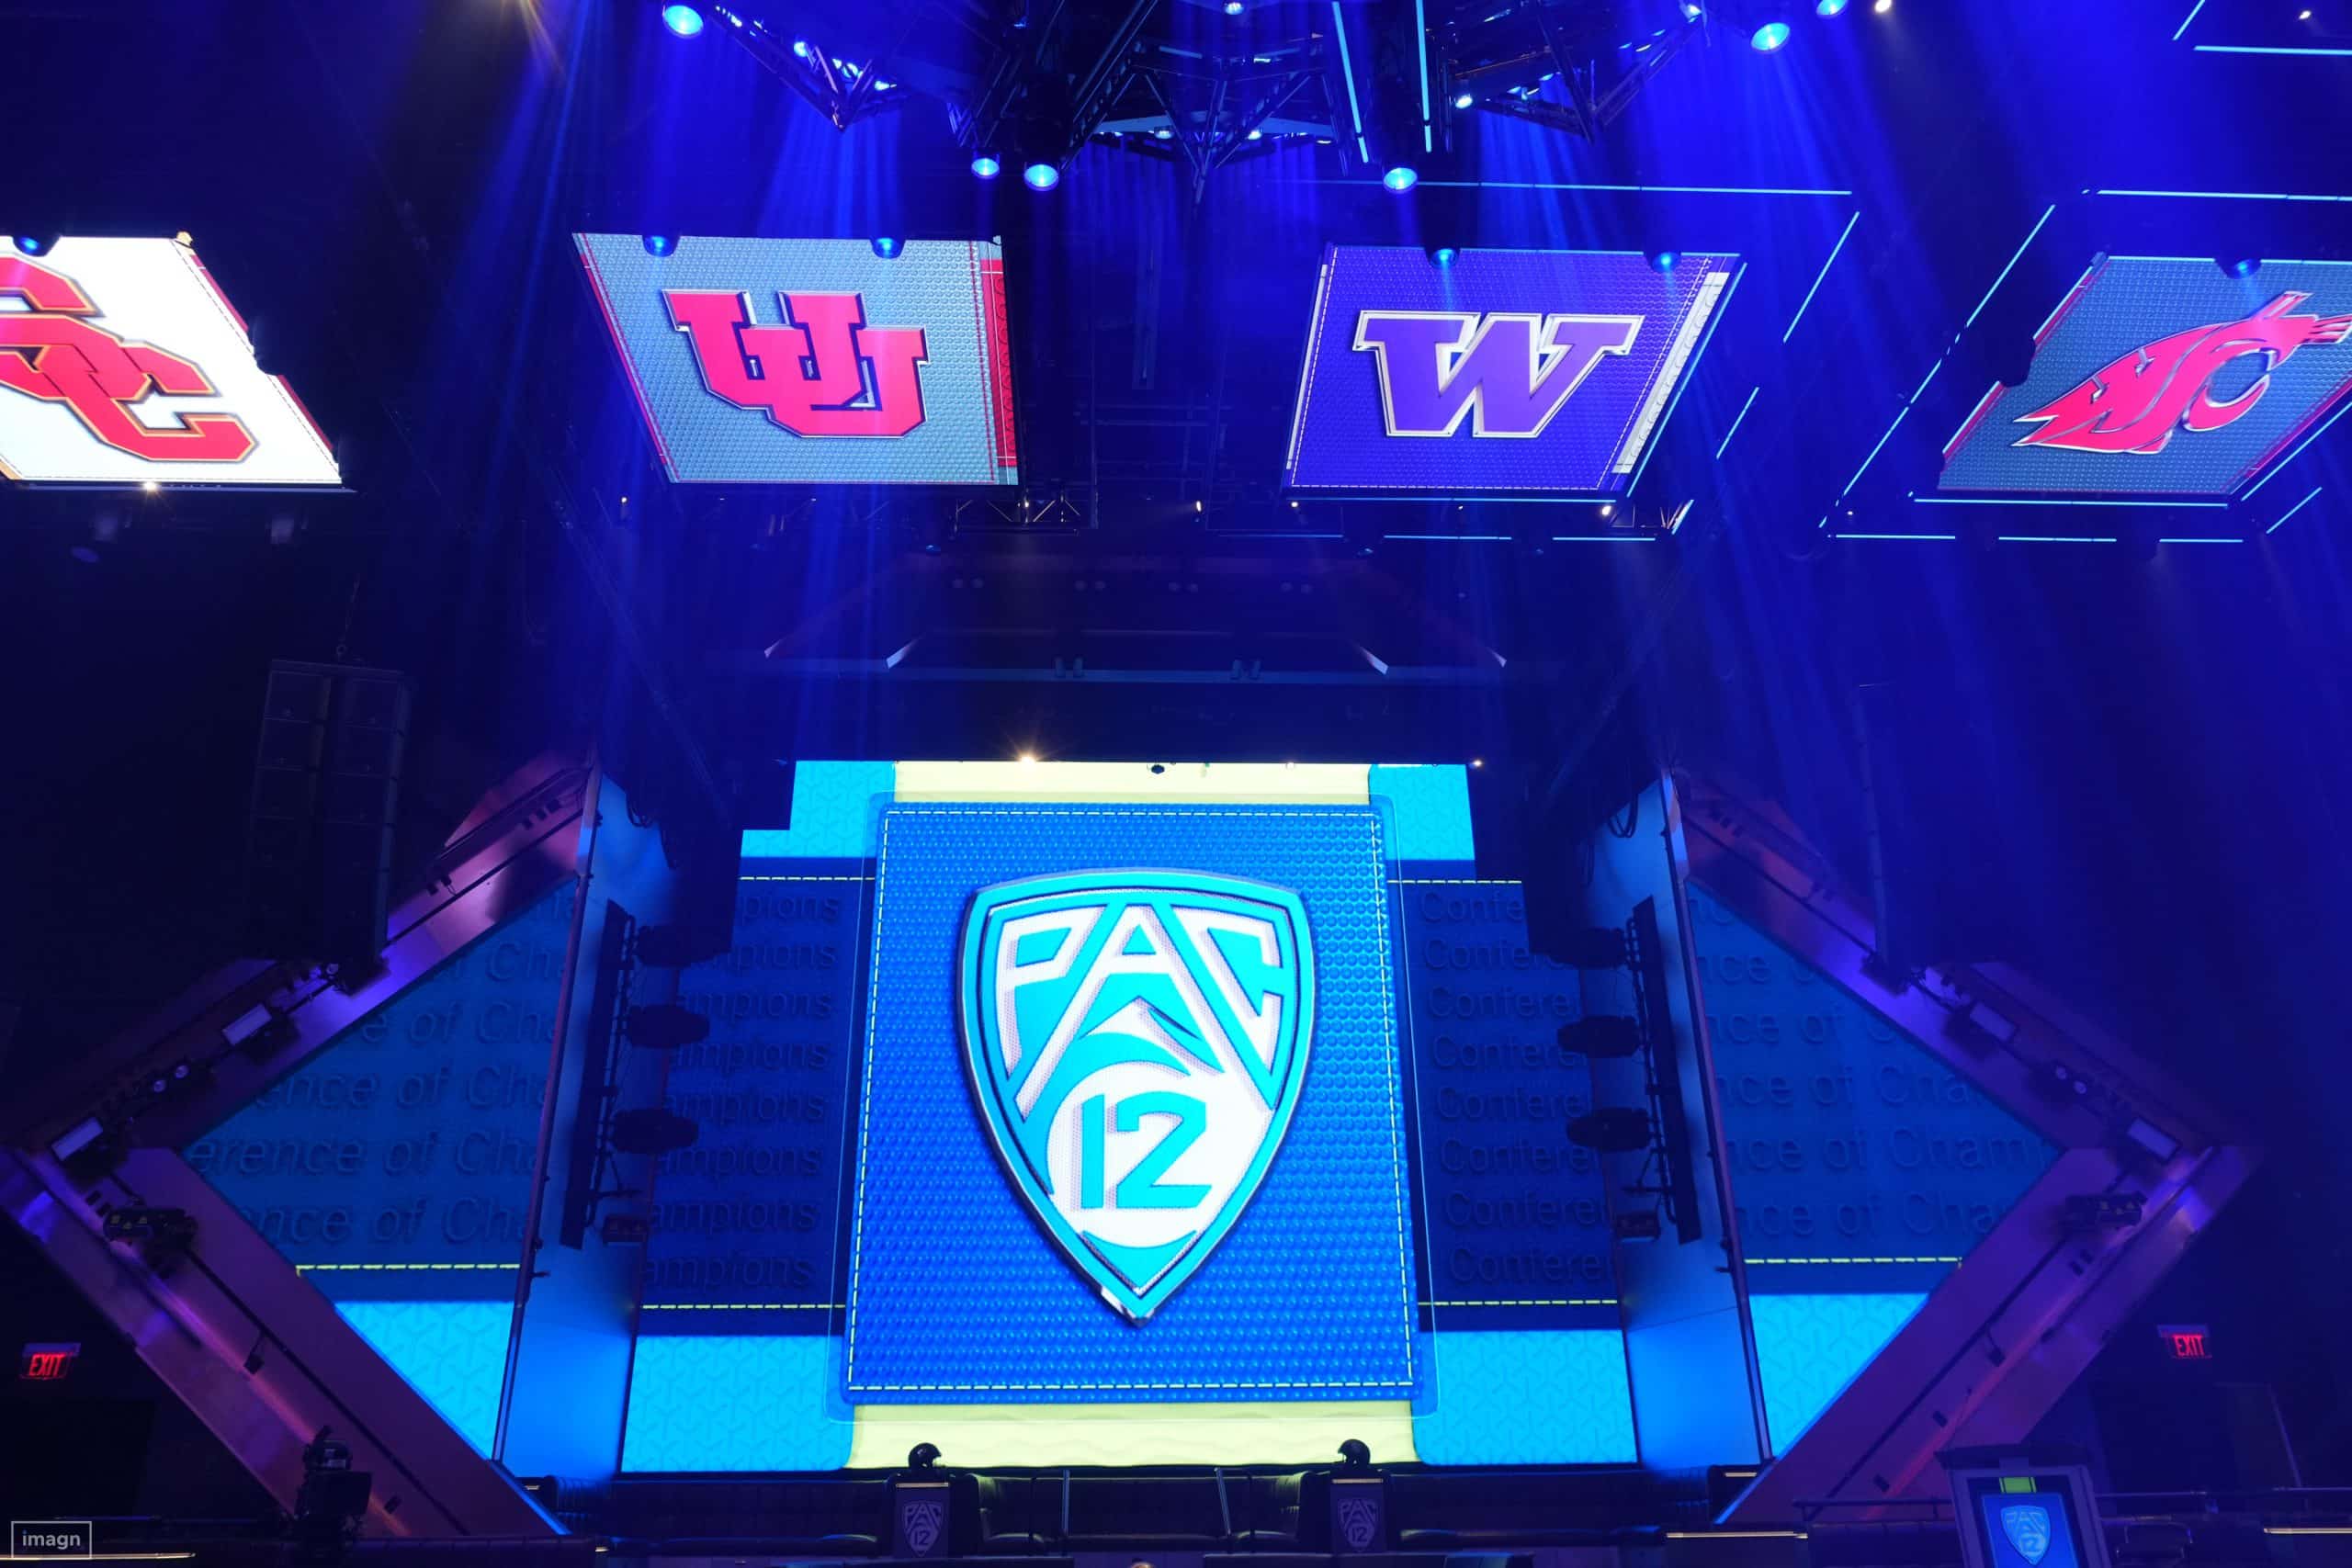 Pac 12's future is in peril.